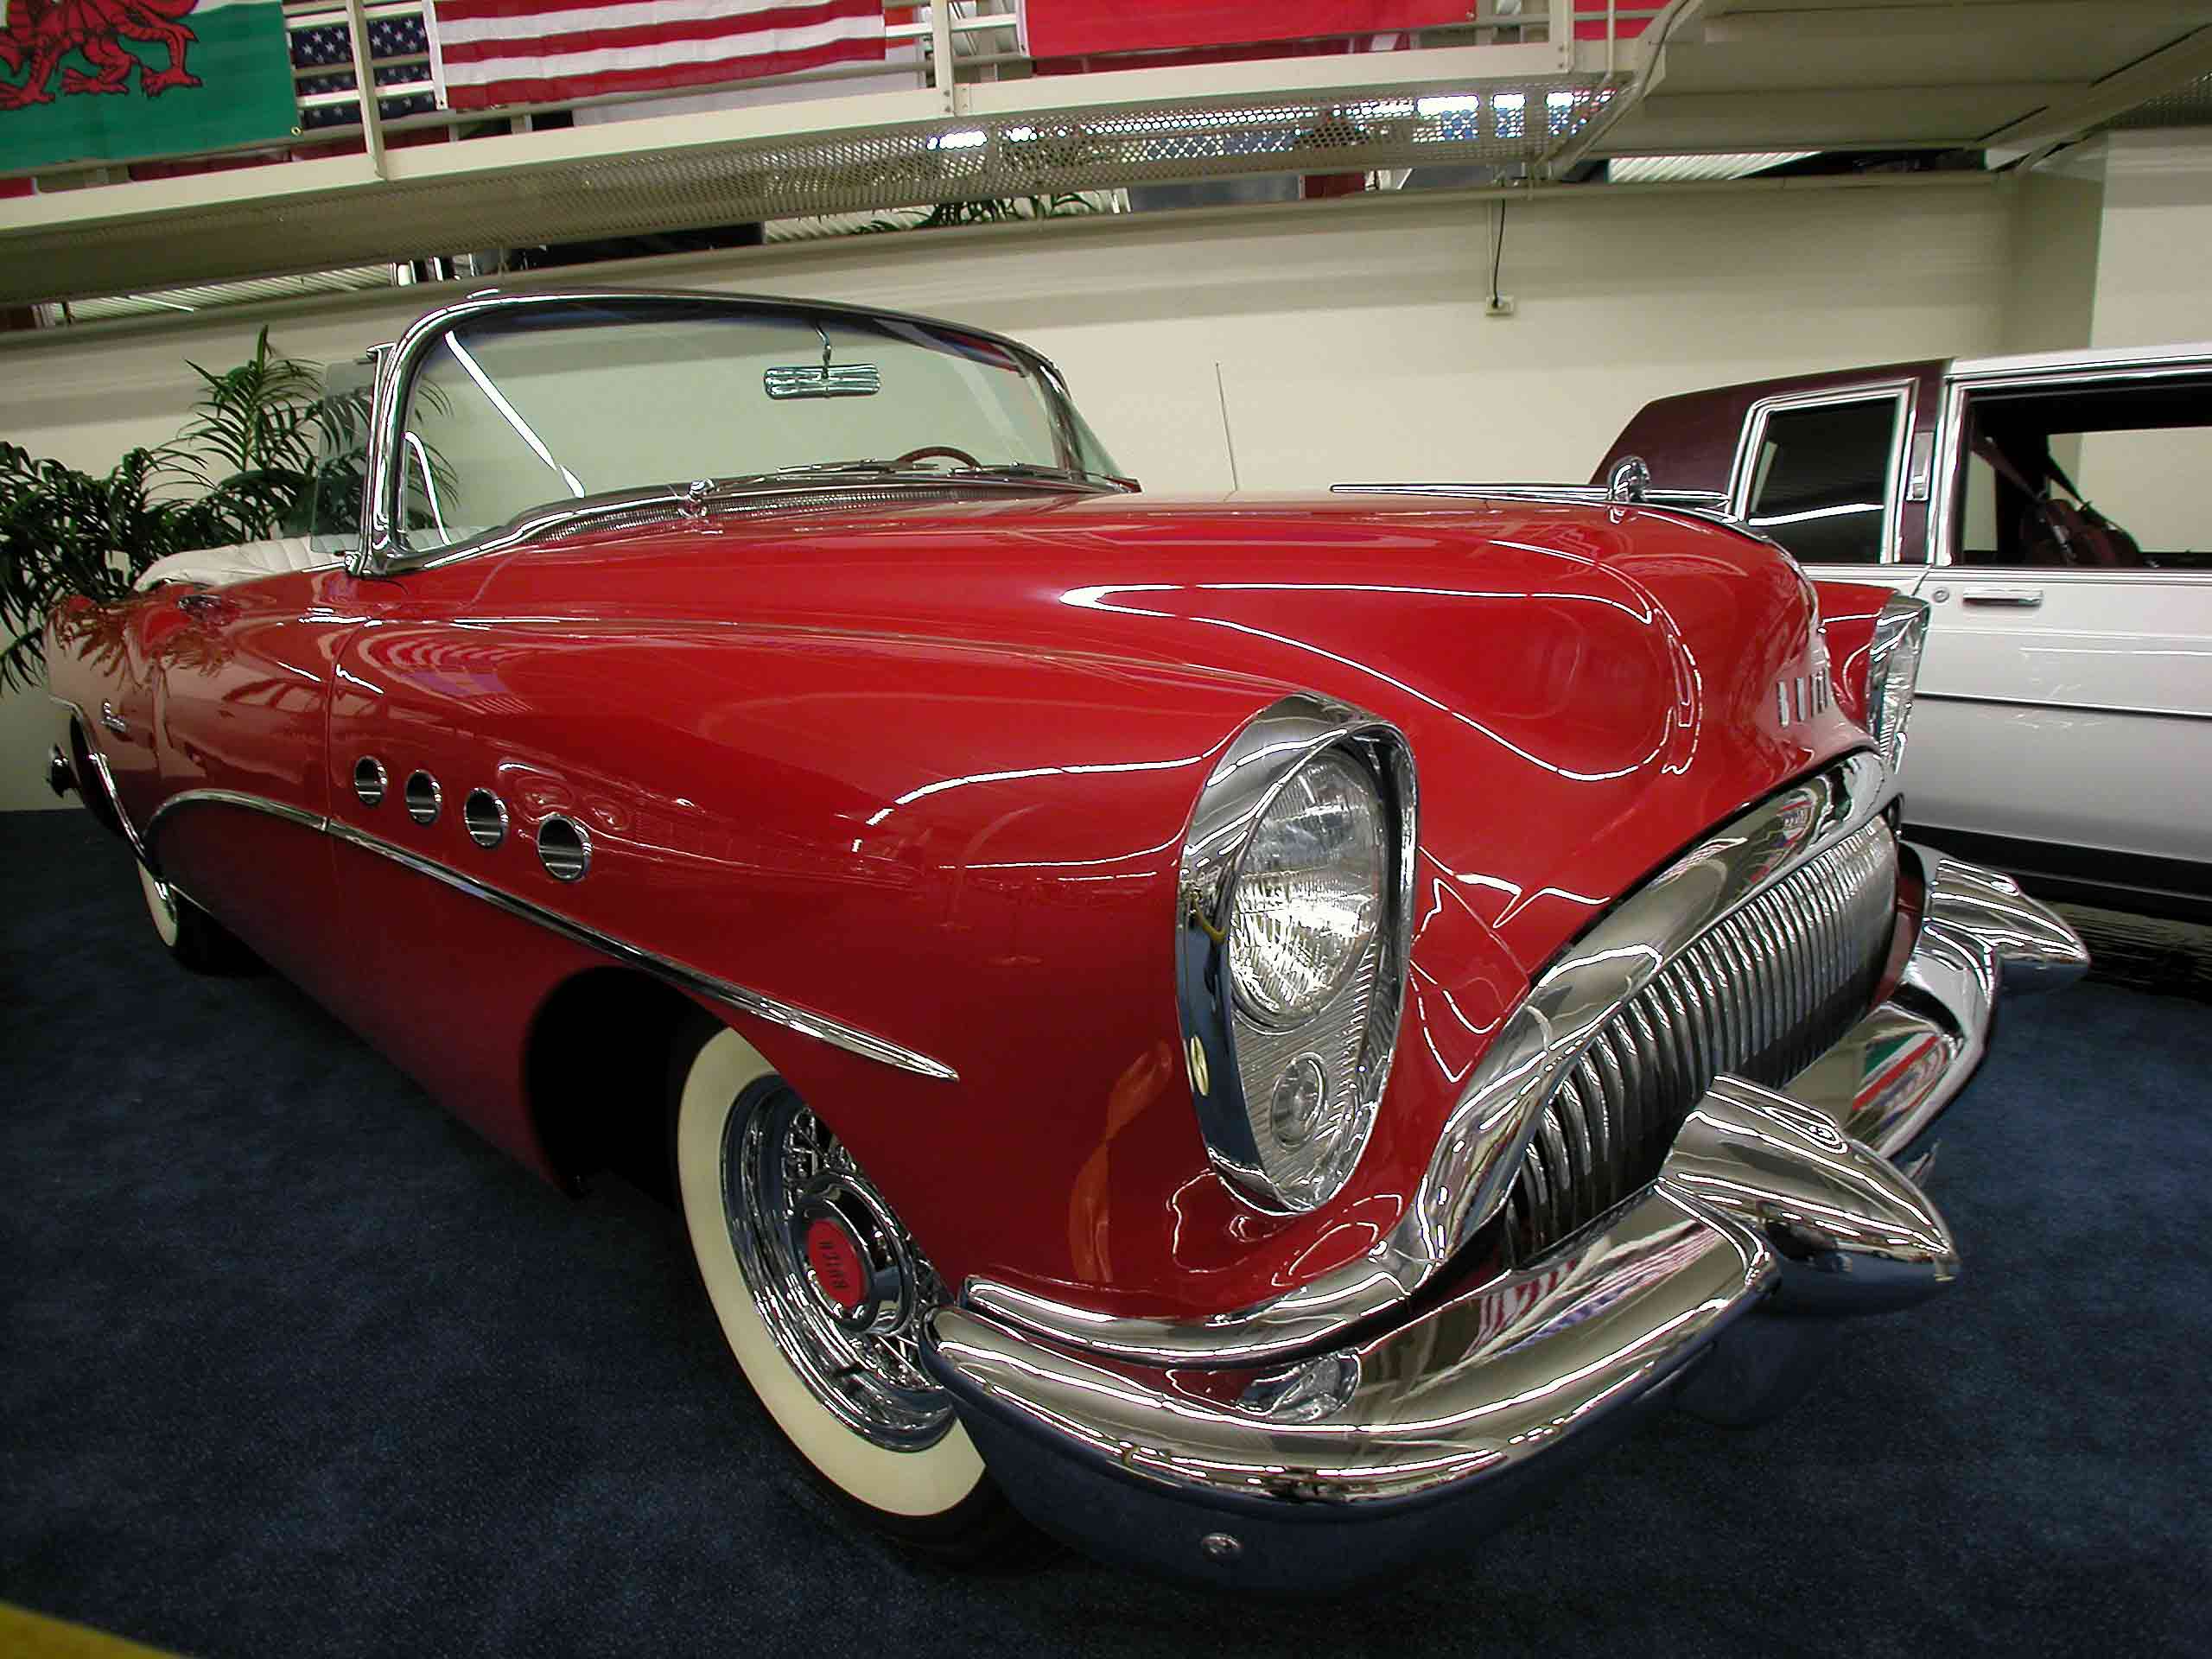 1954 Buick Roadmaster convertable - Click on photo to see much more info